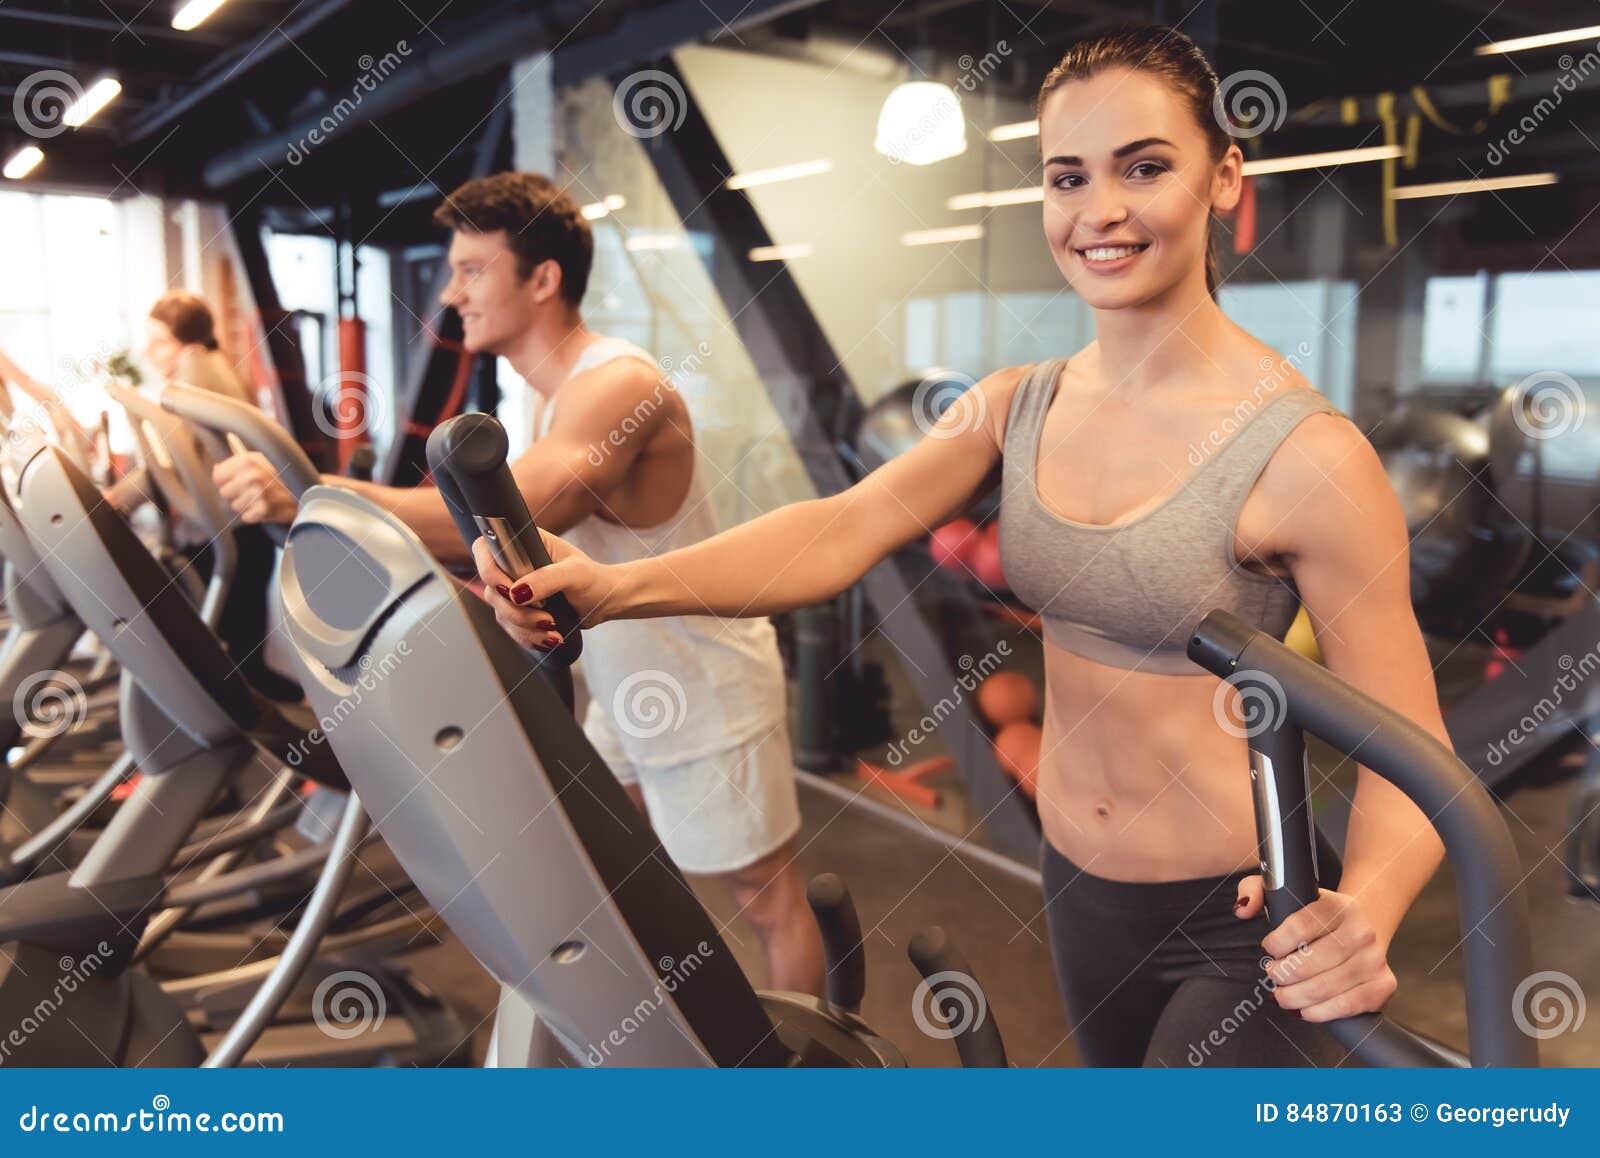 At the gym stock image. Image of machine, center, care - 84870163